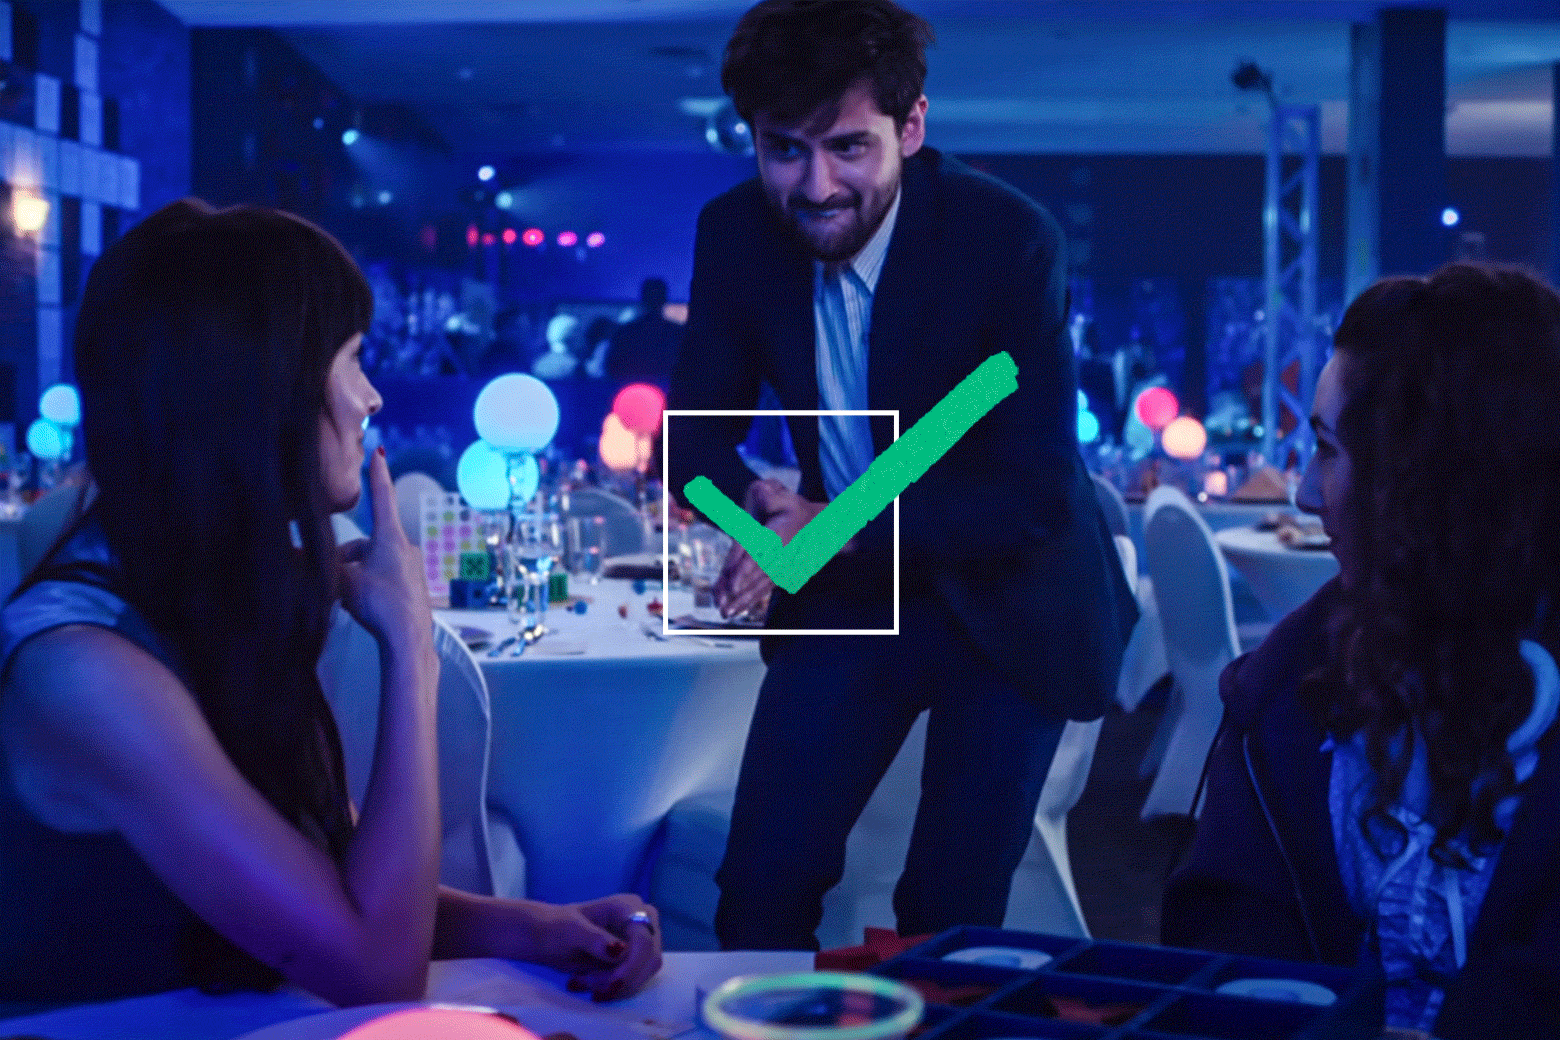 A man approaches a table at a bar mitzvah in a still from the movie. There is a green animated checkmark in a box over the image.